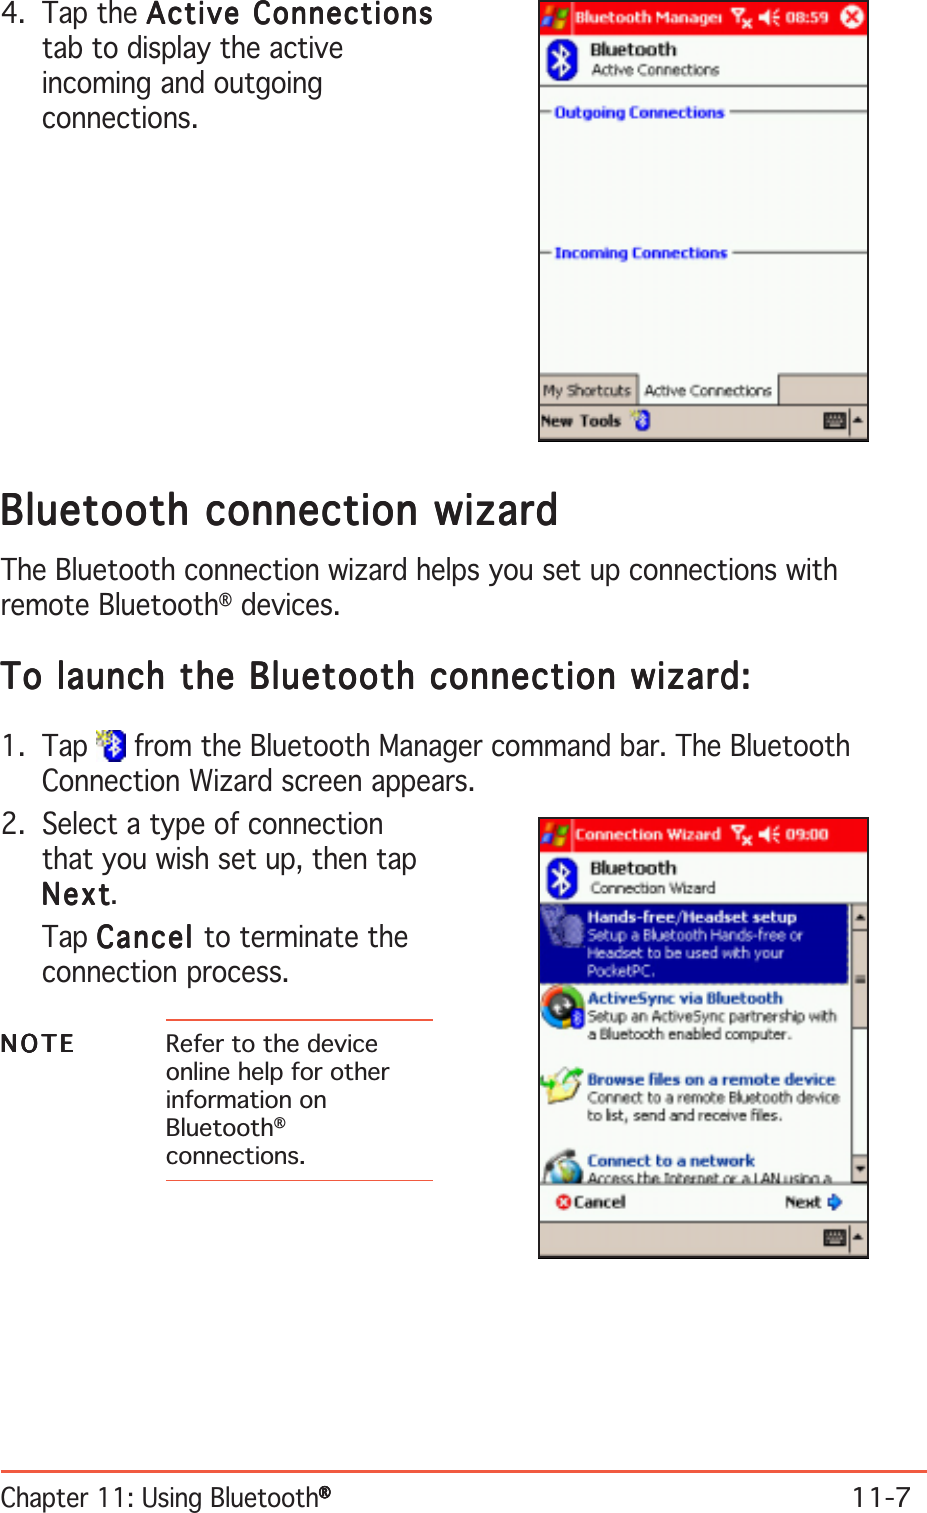 Chapter 11: Using Bluetooth®®®®®11-7Bluetooth connection wizardBluetooth connection wizardBluetooth connection wizardBluetooth connection wizardBluetooth connection wizardThe Bluetooth connection wizard helps you set up connections withremote Bluetooth® devices.To launch the Bluetooth connection wizard:To launch the Bluetooth connection wizard:To launch the Bluetooth connection wizard:To launch the Bluetooth connection wizard:To launch the Bluetooth connection wizard:1. Tap   from the Bluetooth Manager command bar. The BluetoothConnection Wizard screen appears.2. Select a type of connectionthat you wish set up, then tapNextNextNextNextNext.Tap CancelCancelCancelCancelCancel  to terminate theconnection process.NOTENOTENOTENOTEN O T E Refer to the deviceonline help for otherinformation onBluetooth®connections.4. Tap the Active ConnectionsActive ConnectionsActive ConnectionsActive ConnectionsActive Connectionstab to display the activeincoming and outgoingconnections.